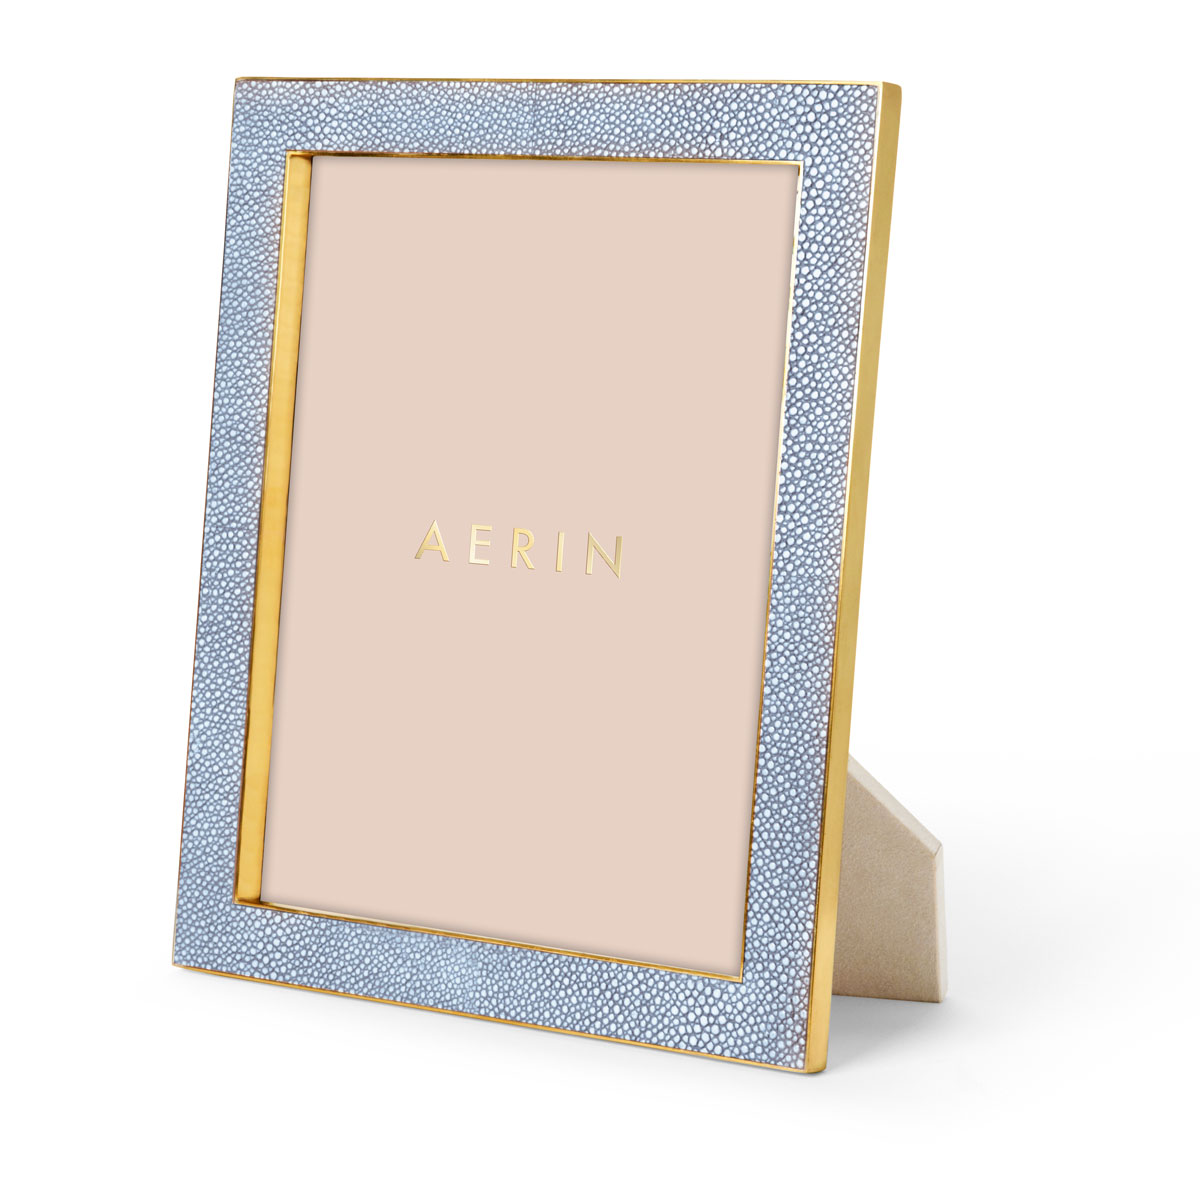 Aerin Classic Shagreen Blue 8x10" Picture Frame